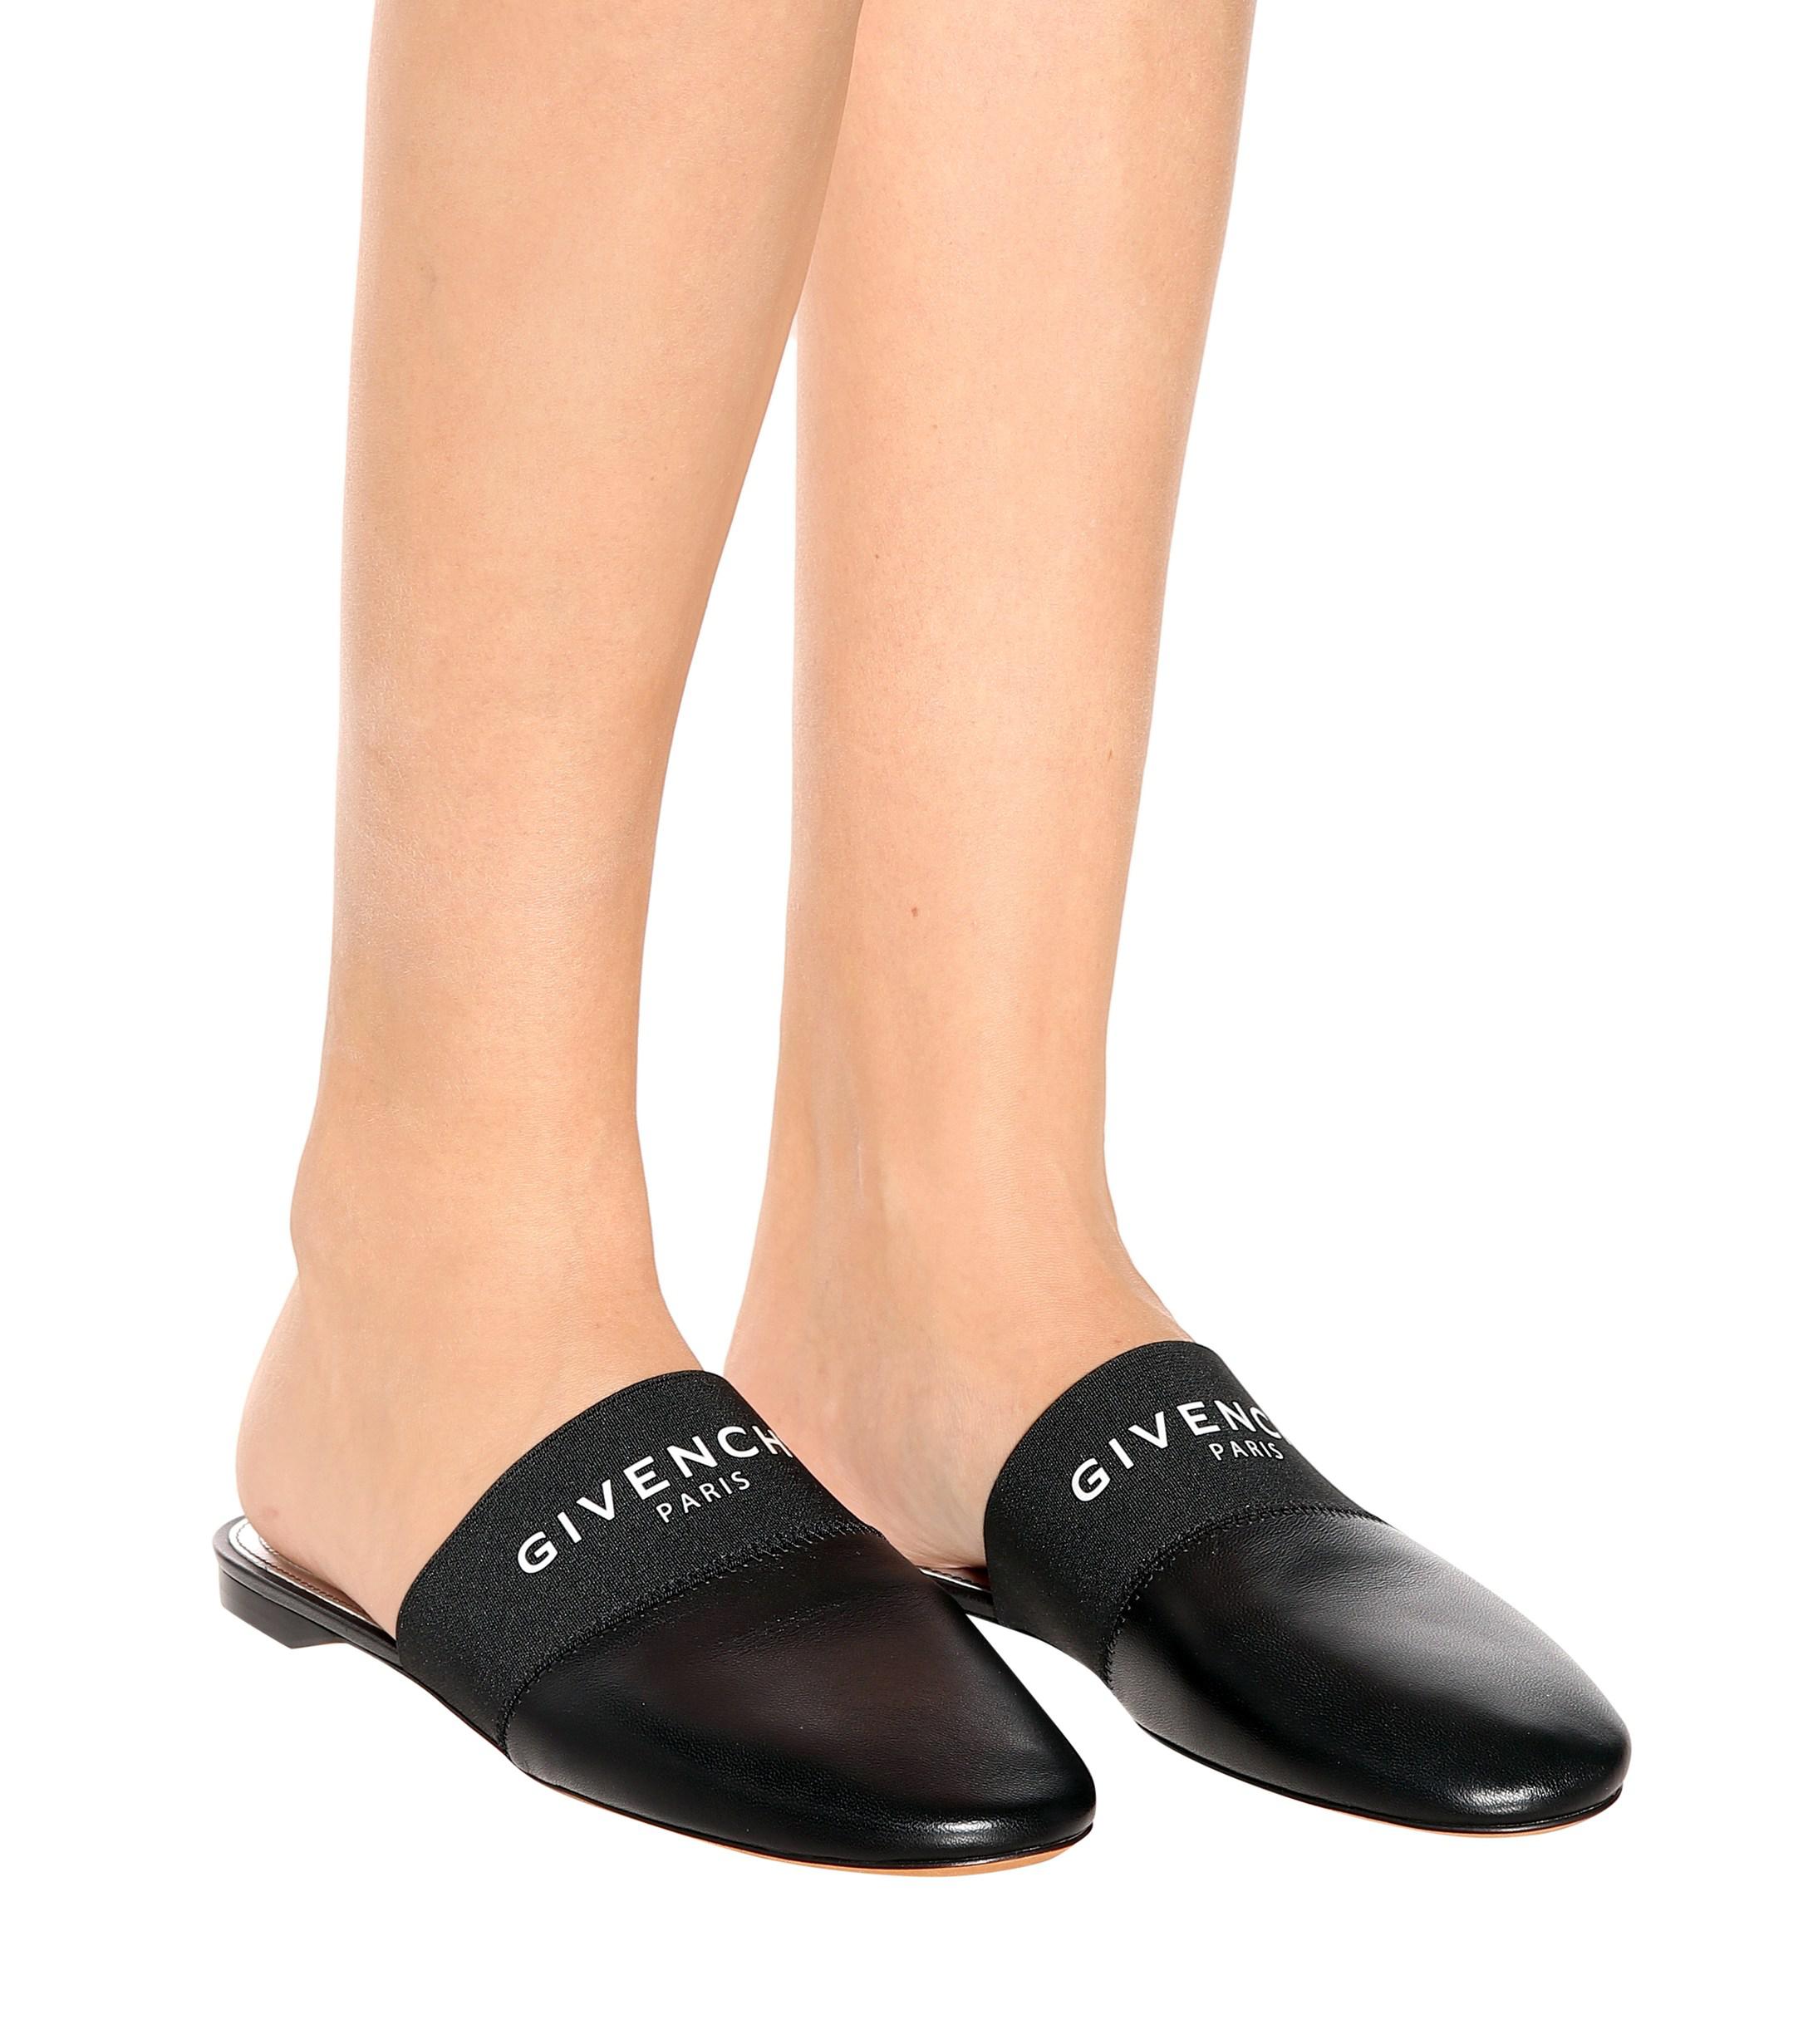 Givenchy Leather Bedford Black Flat Mules - Save 41% - Lyst